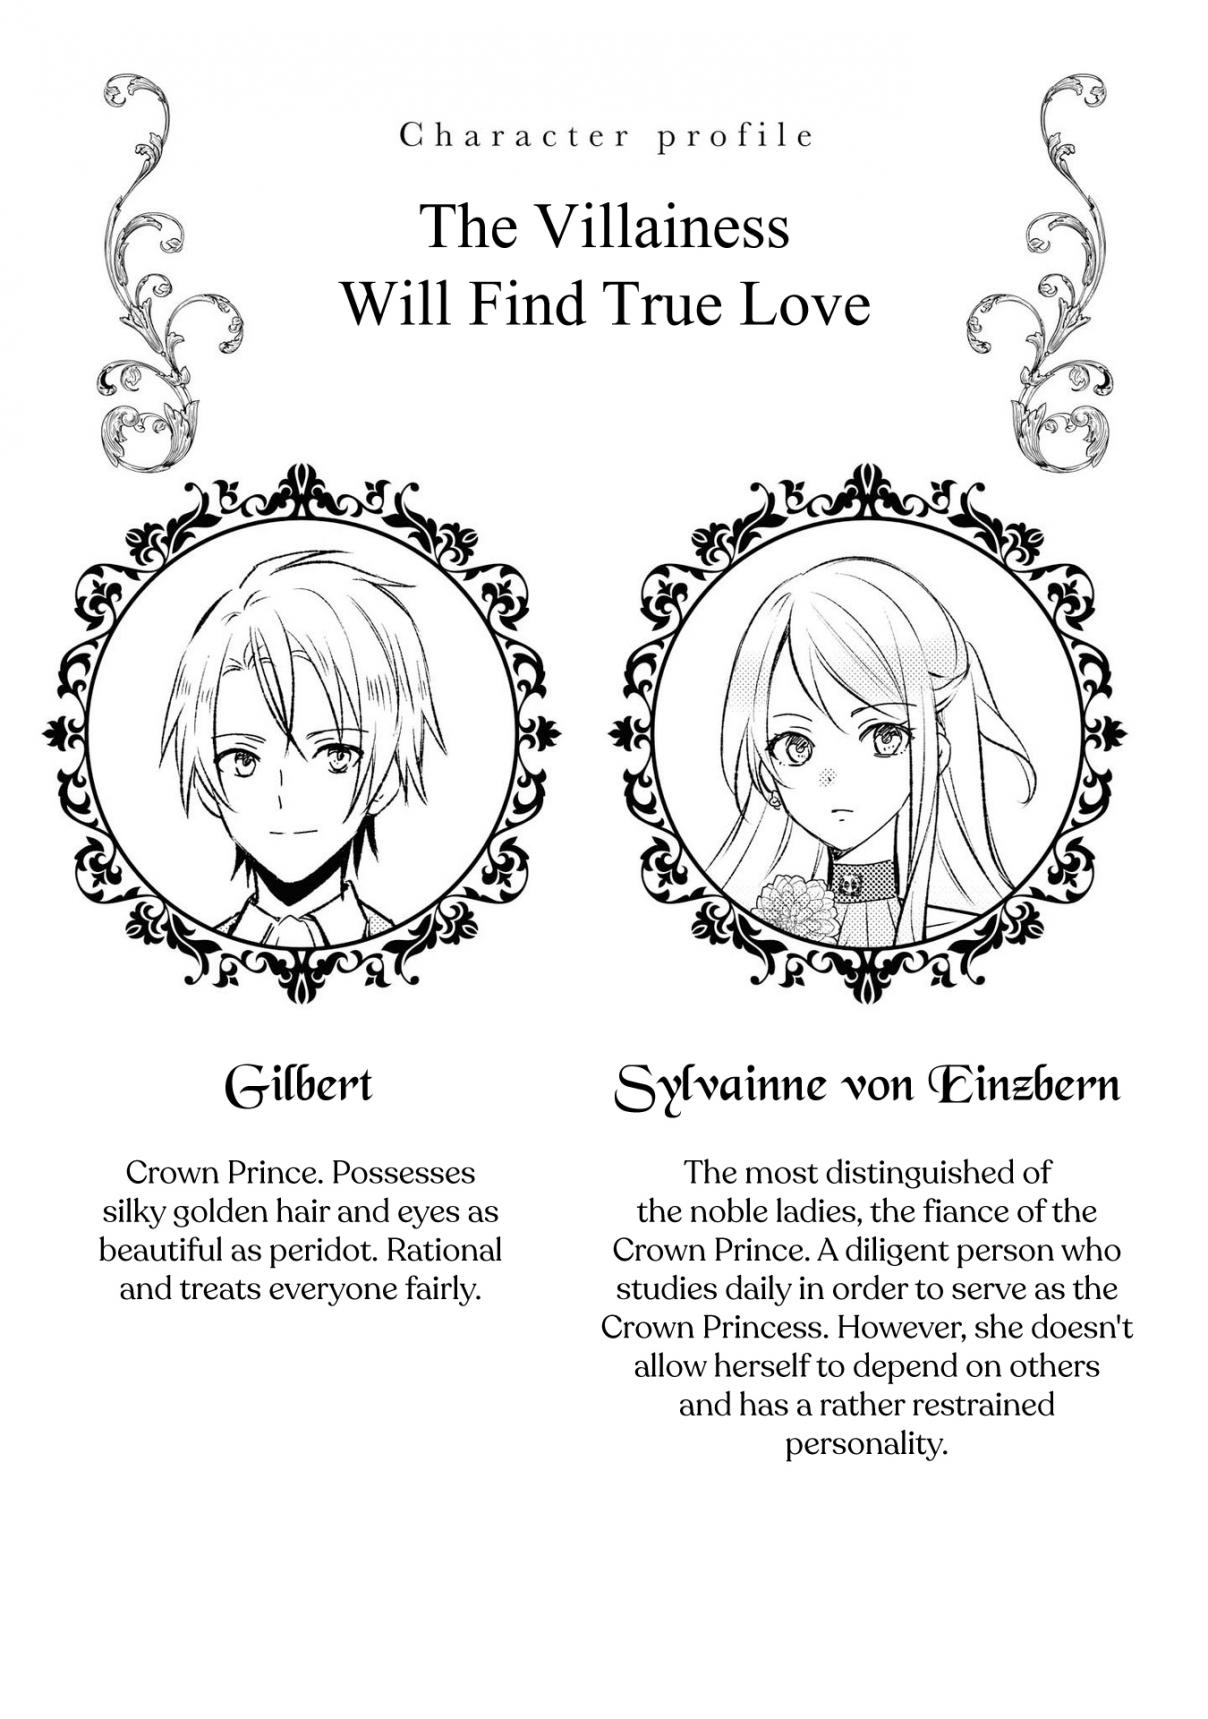 Though I May Be a Villainess, I'll Show You I Can Obtain Happiness! Vol. 1 Ch. 1 The Villainess Will Obtain True Love